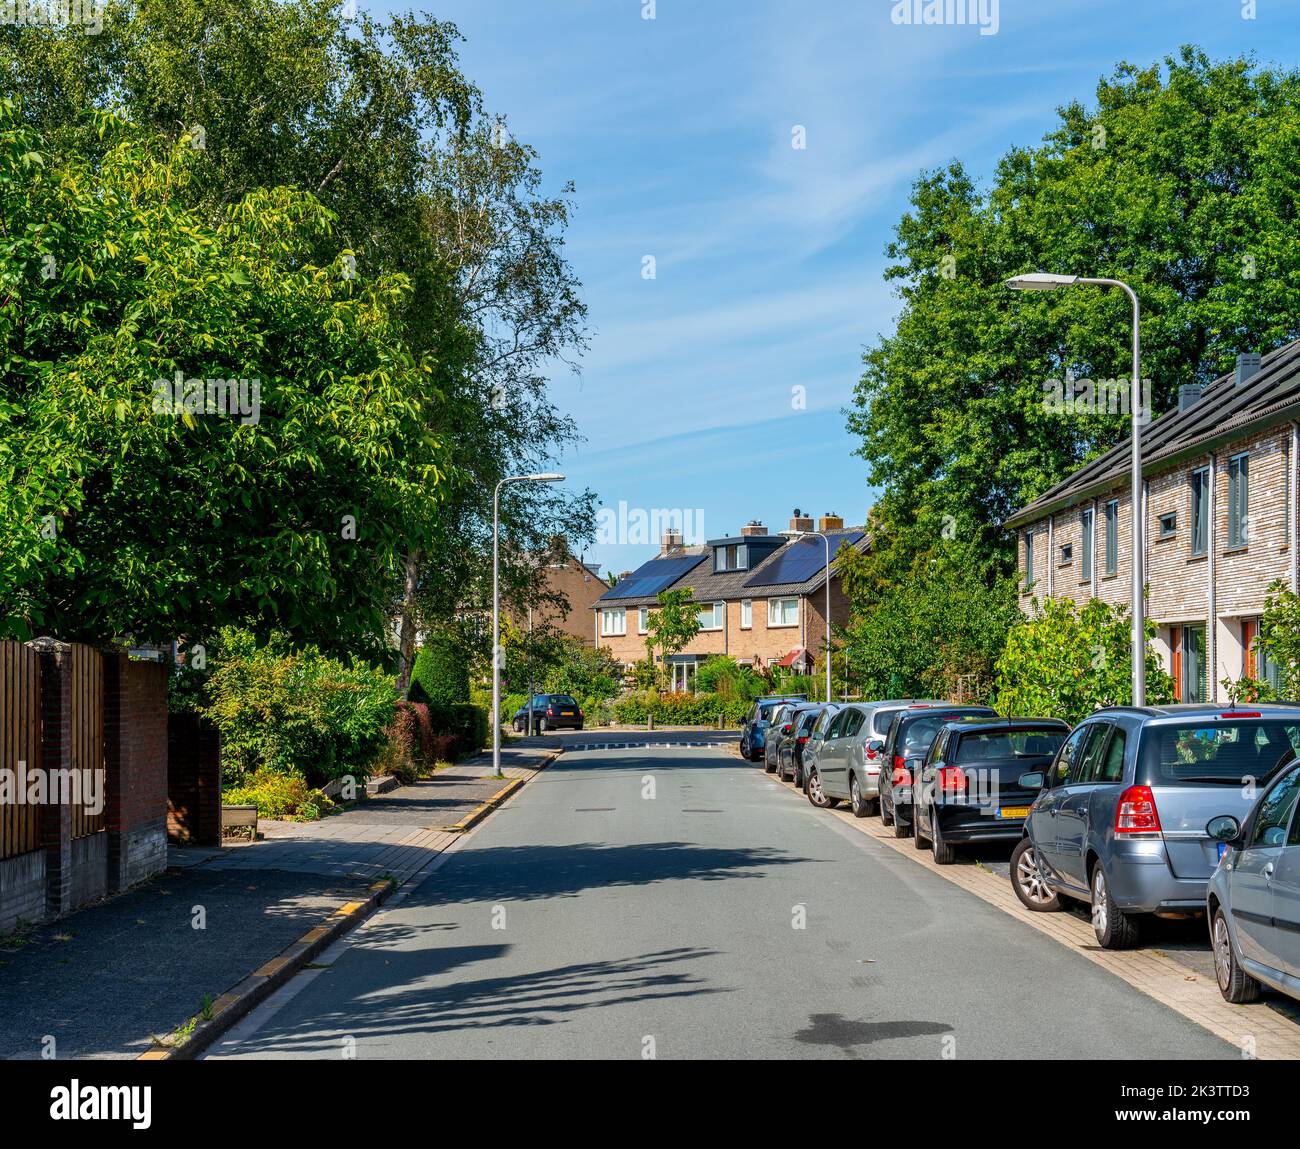 Street in a residential area in the Netherlands Stock Photo